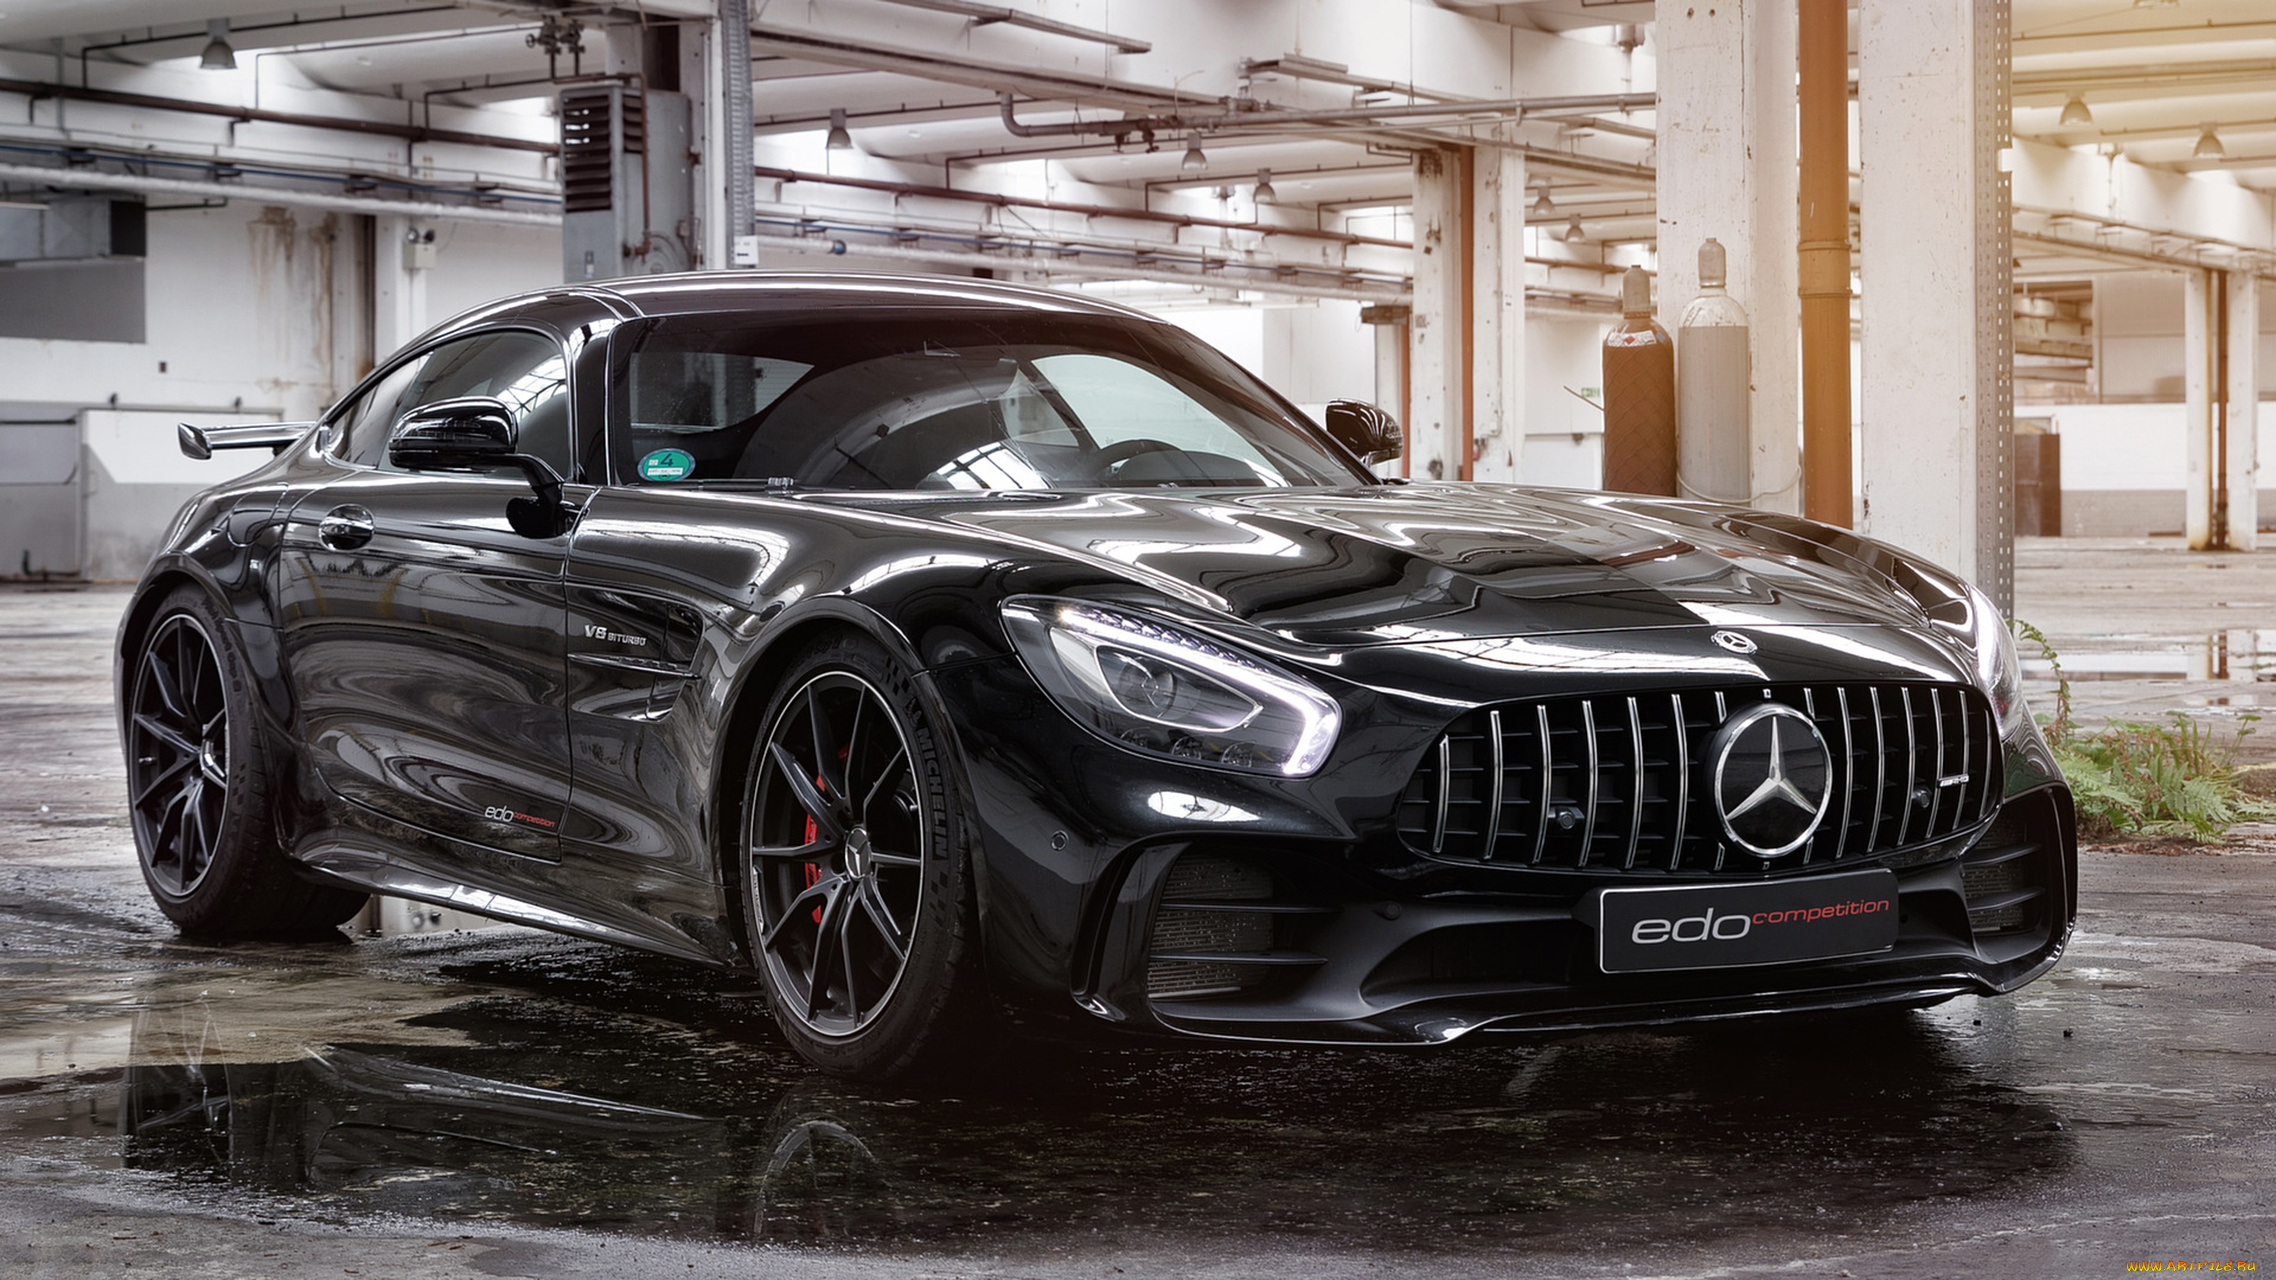 edo, competition, mercedes-benz, amg, gt-r, 2018, автомобили, mercedes-benz, edo, competition, amg, gt-r, 2018